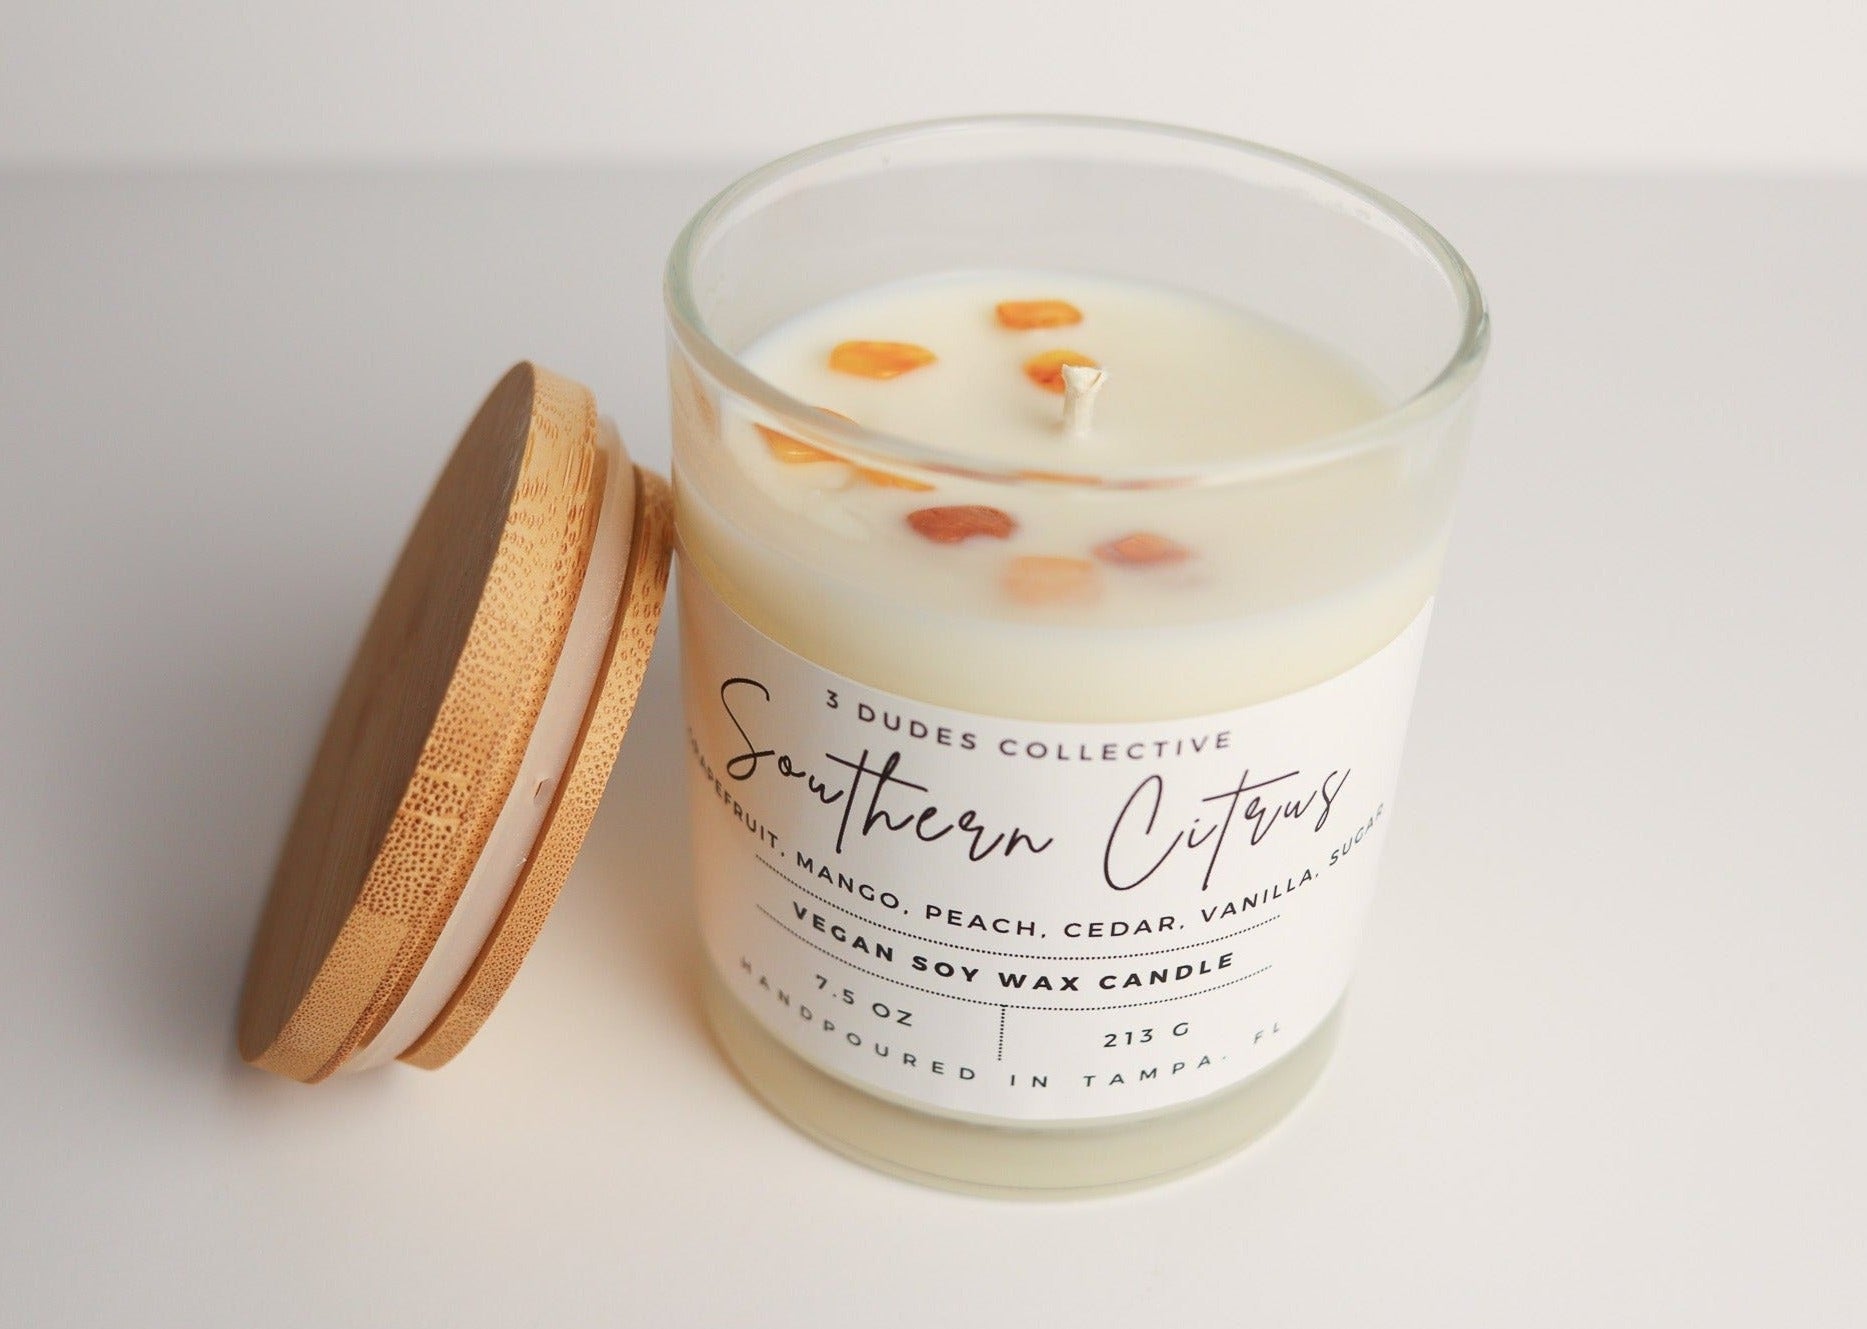 Crystal Gardens Collection: Southern Citrus